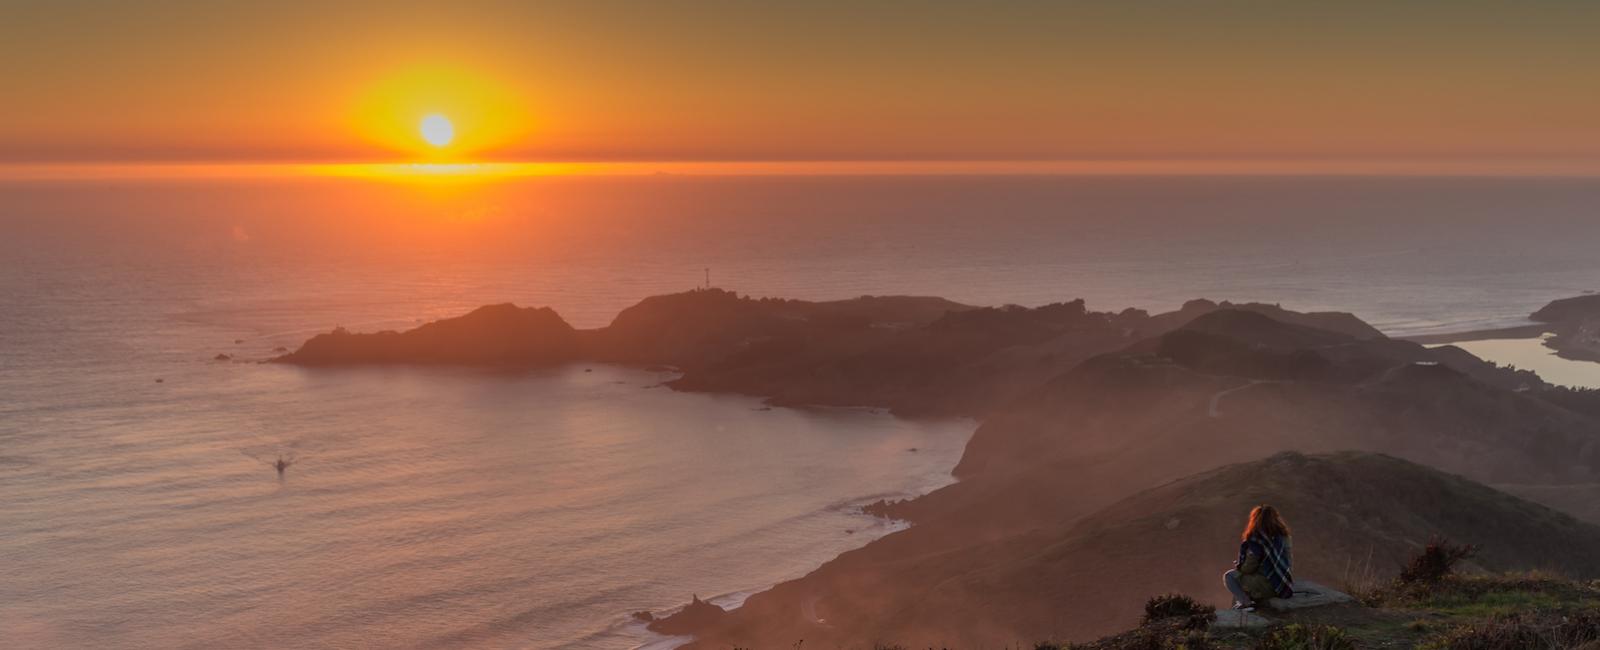 Gazing at the sunset from the Marin Headlands